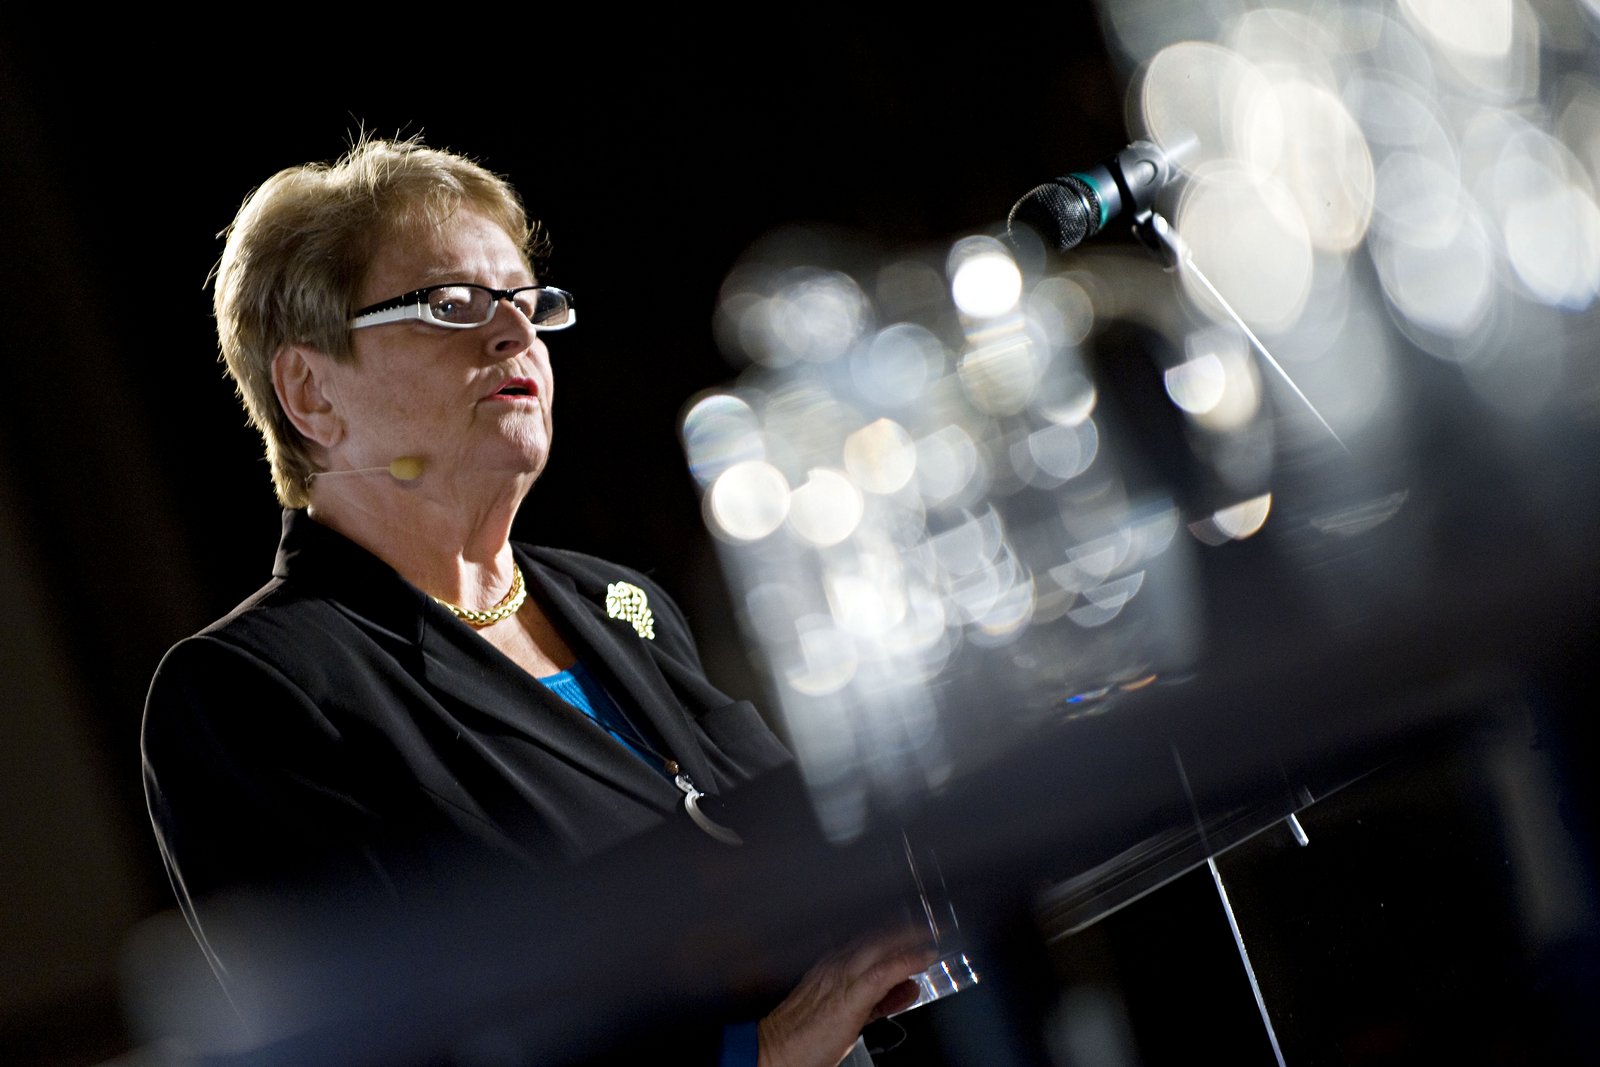 Gro Harlem Brundtland at the CCC Event during the COP15 